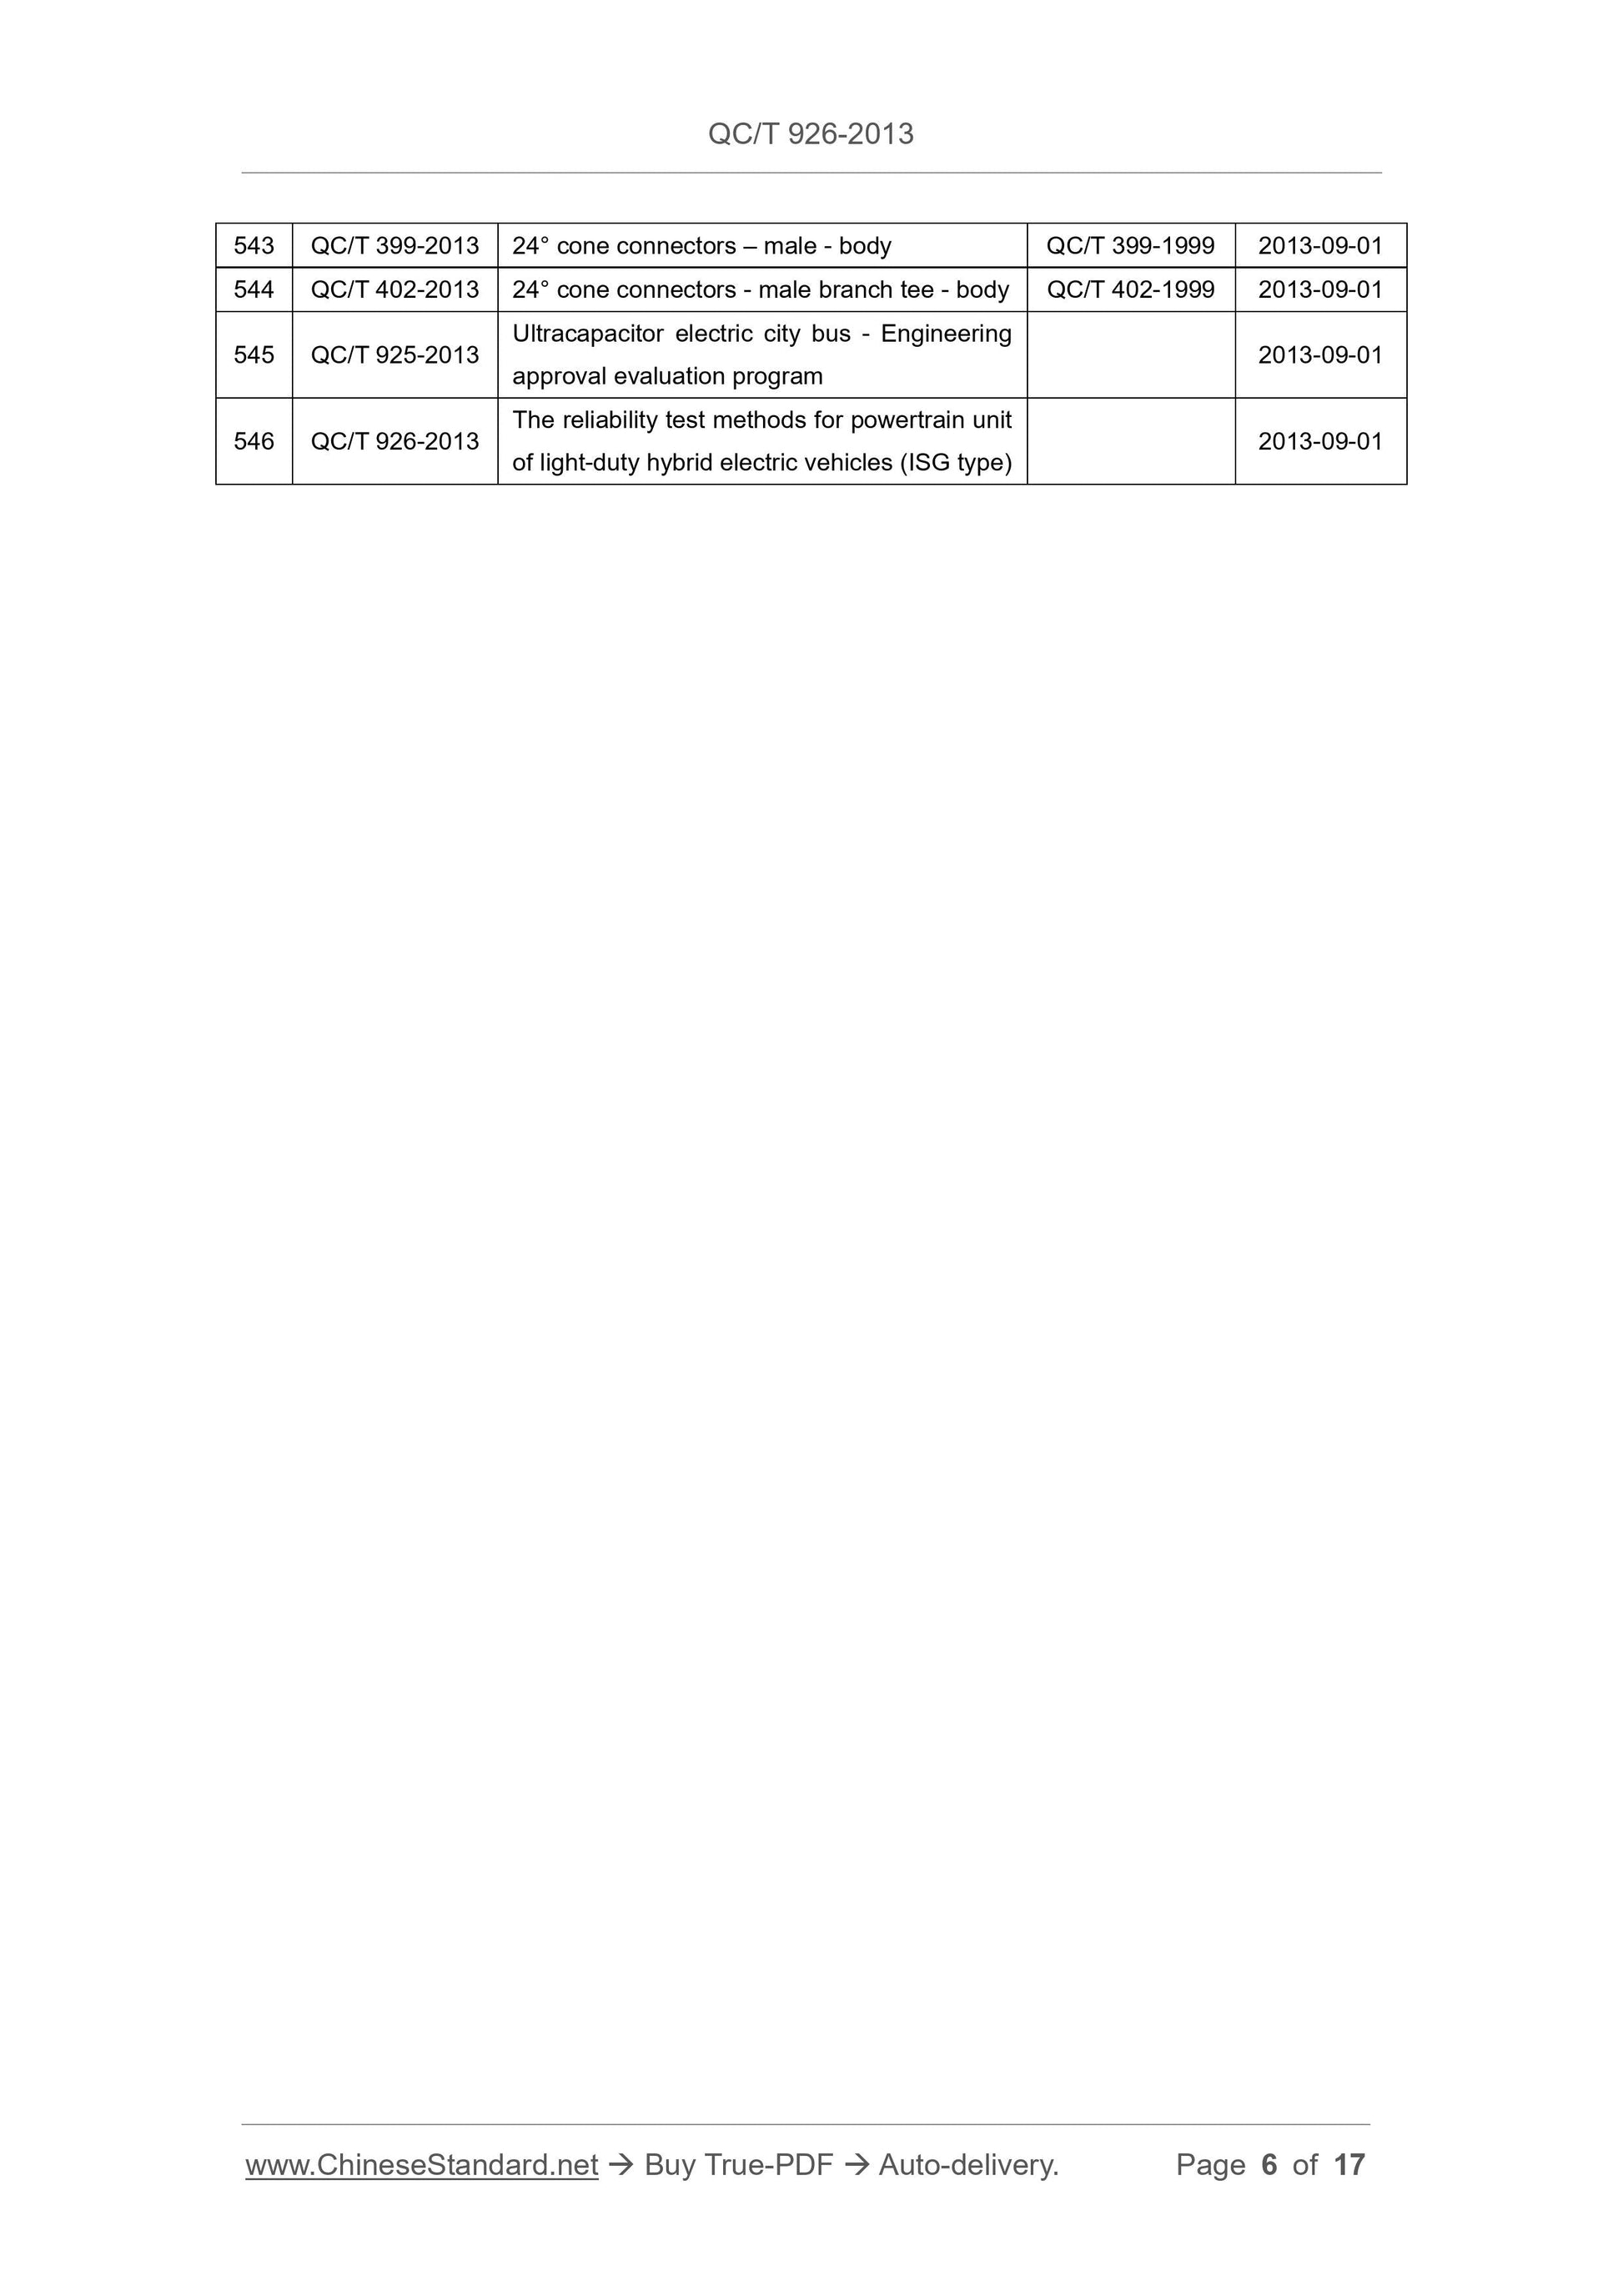 QC/T 926-2013 Page 6